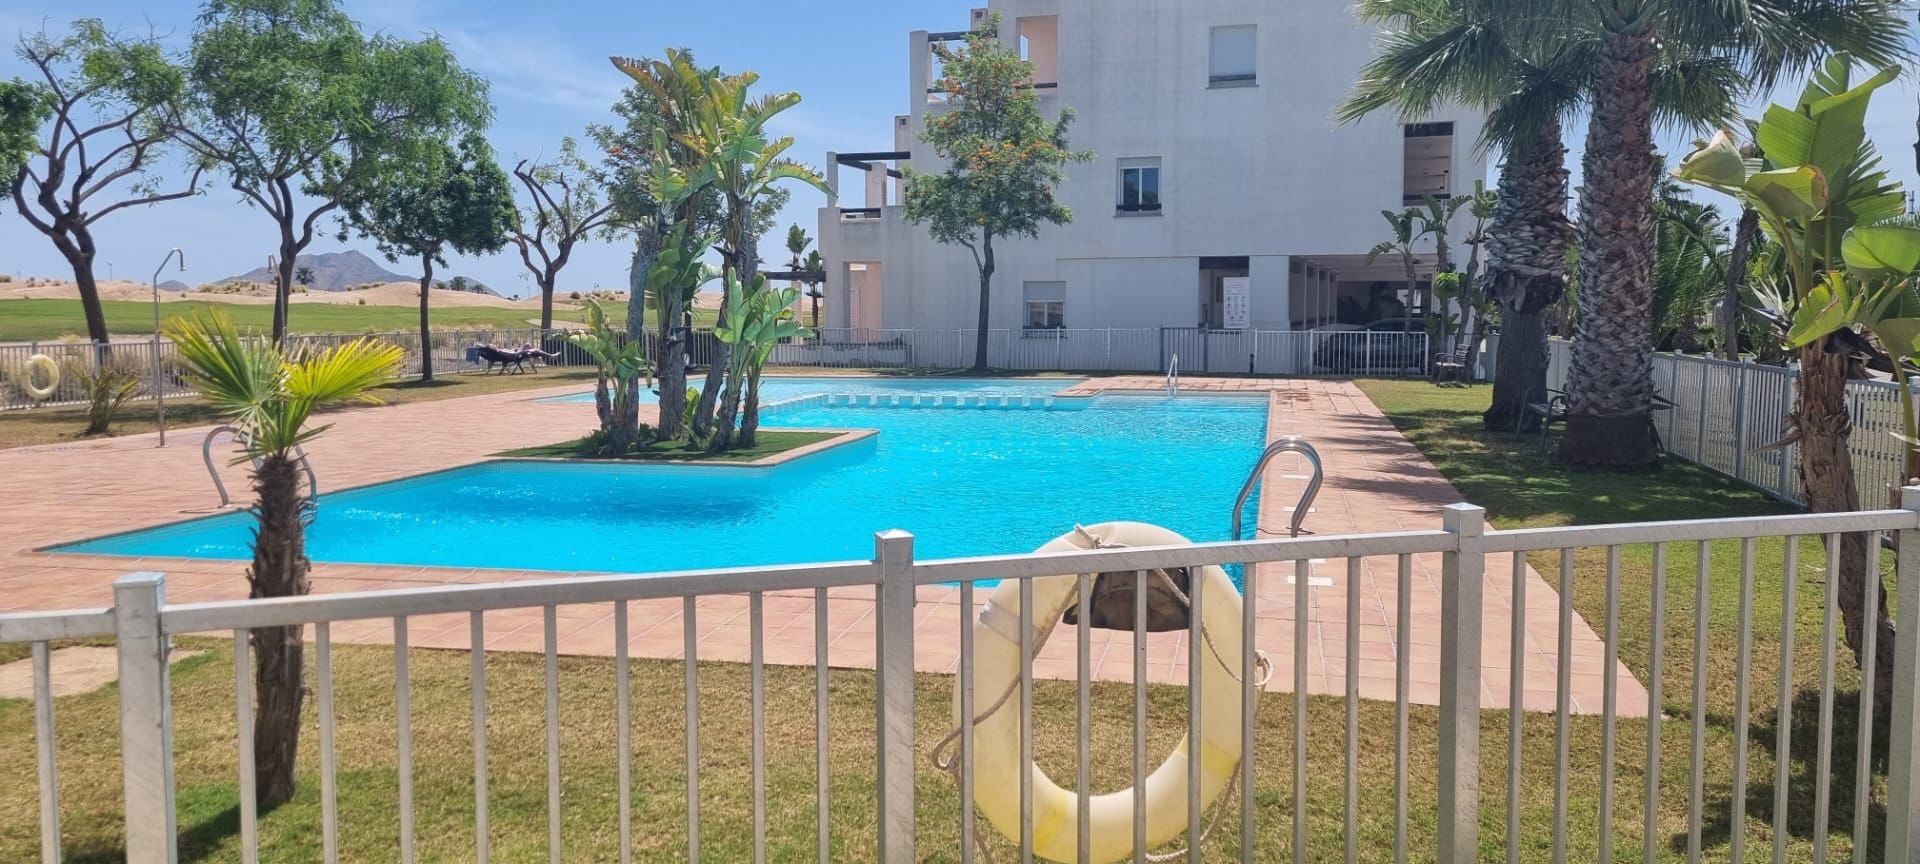 2 bedroom apartment / flat for sale in Torre-Pacheco, Costa Calida